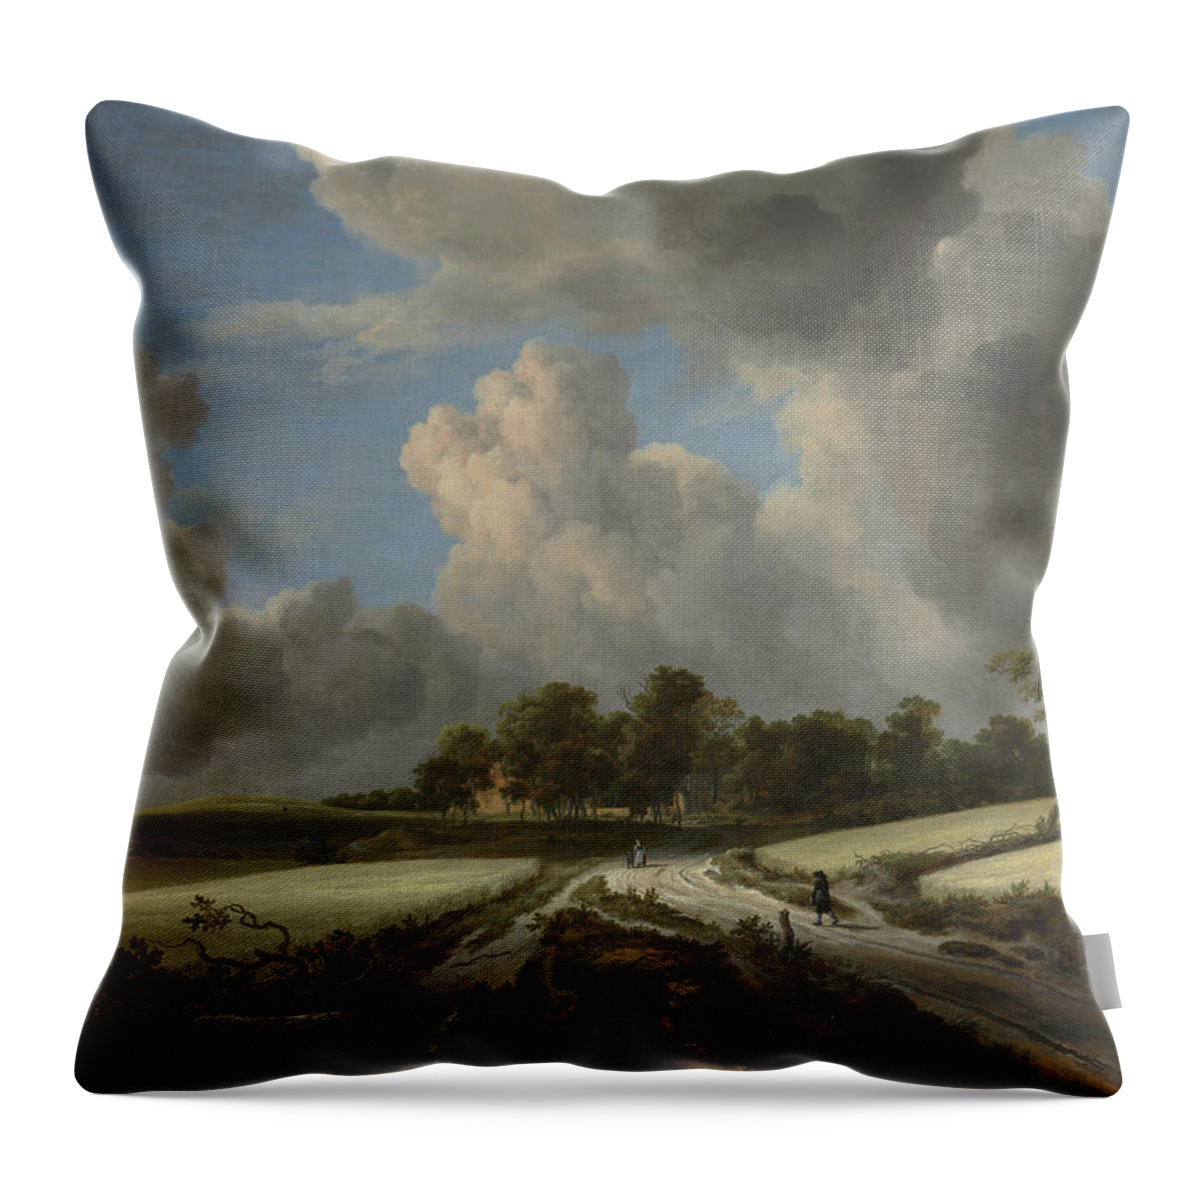 Wheat Fields Throw Pillow featuring the painting Wheat Fields #3 by MotionAge Designs